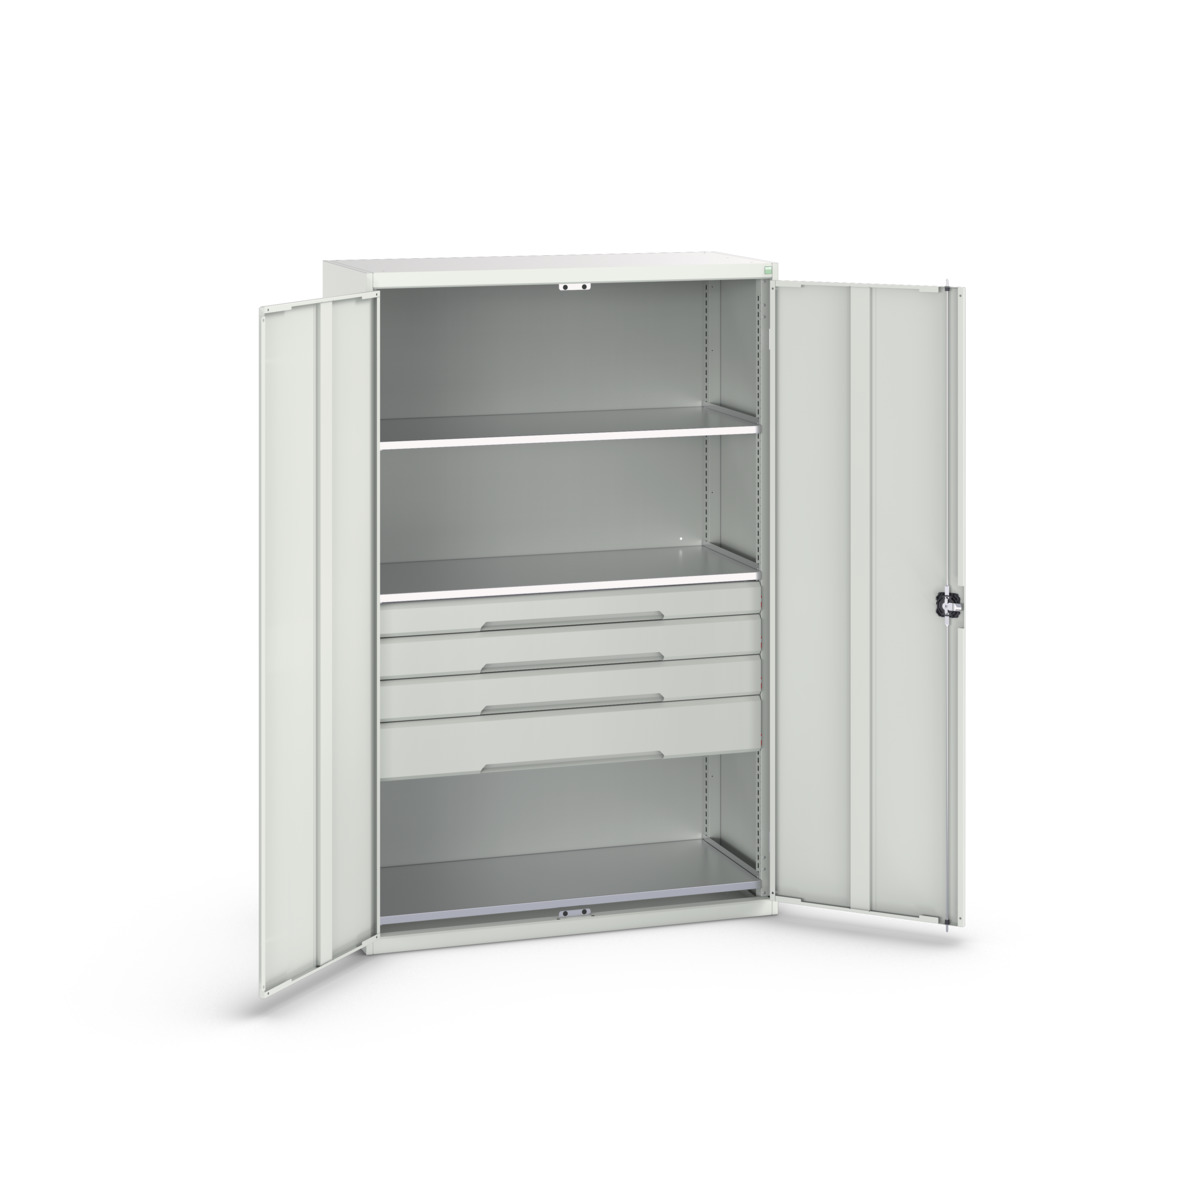 16926656.16 - verso kitted cupboard